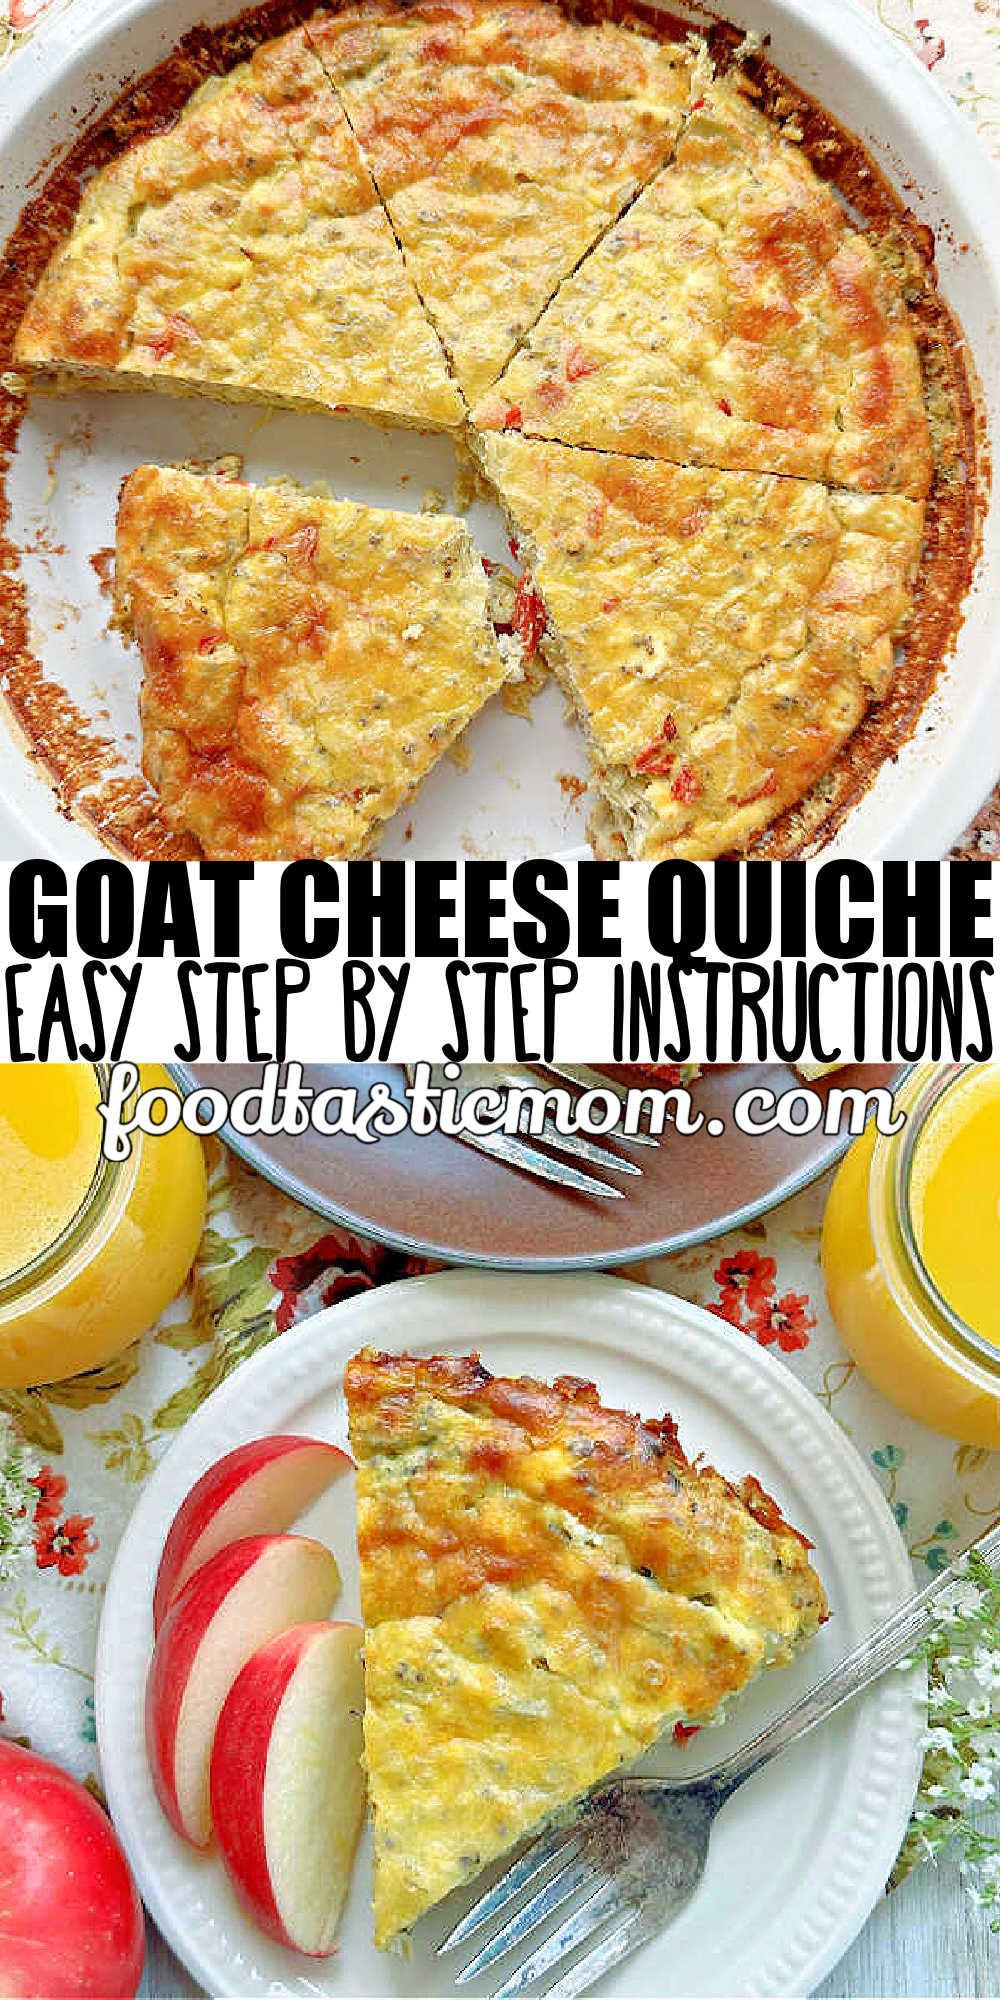 This Goat Cheese Quiche tastes indulgent but it's crustless! Artichoke hearts, roasted red peppers, goat cheese and a surprising ingredient combine for a really delicious quiche. via @foodtasticmom